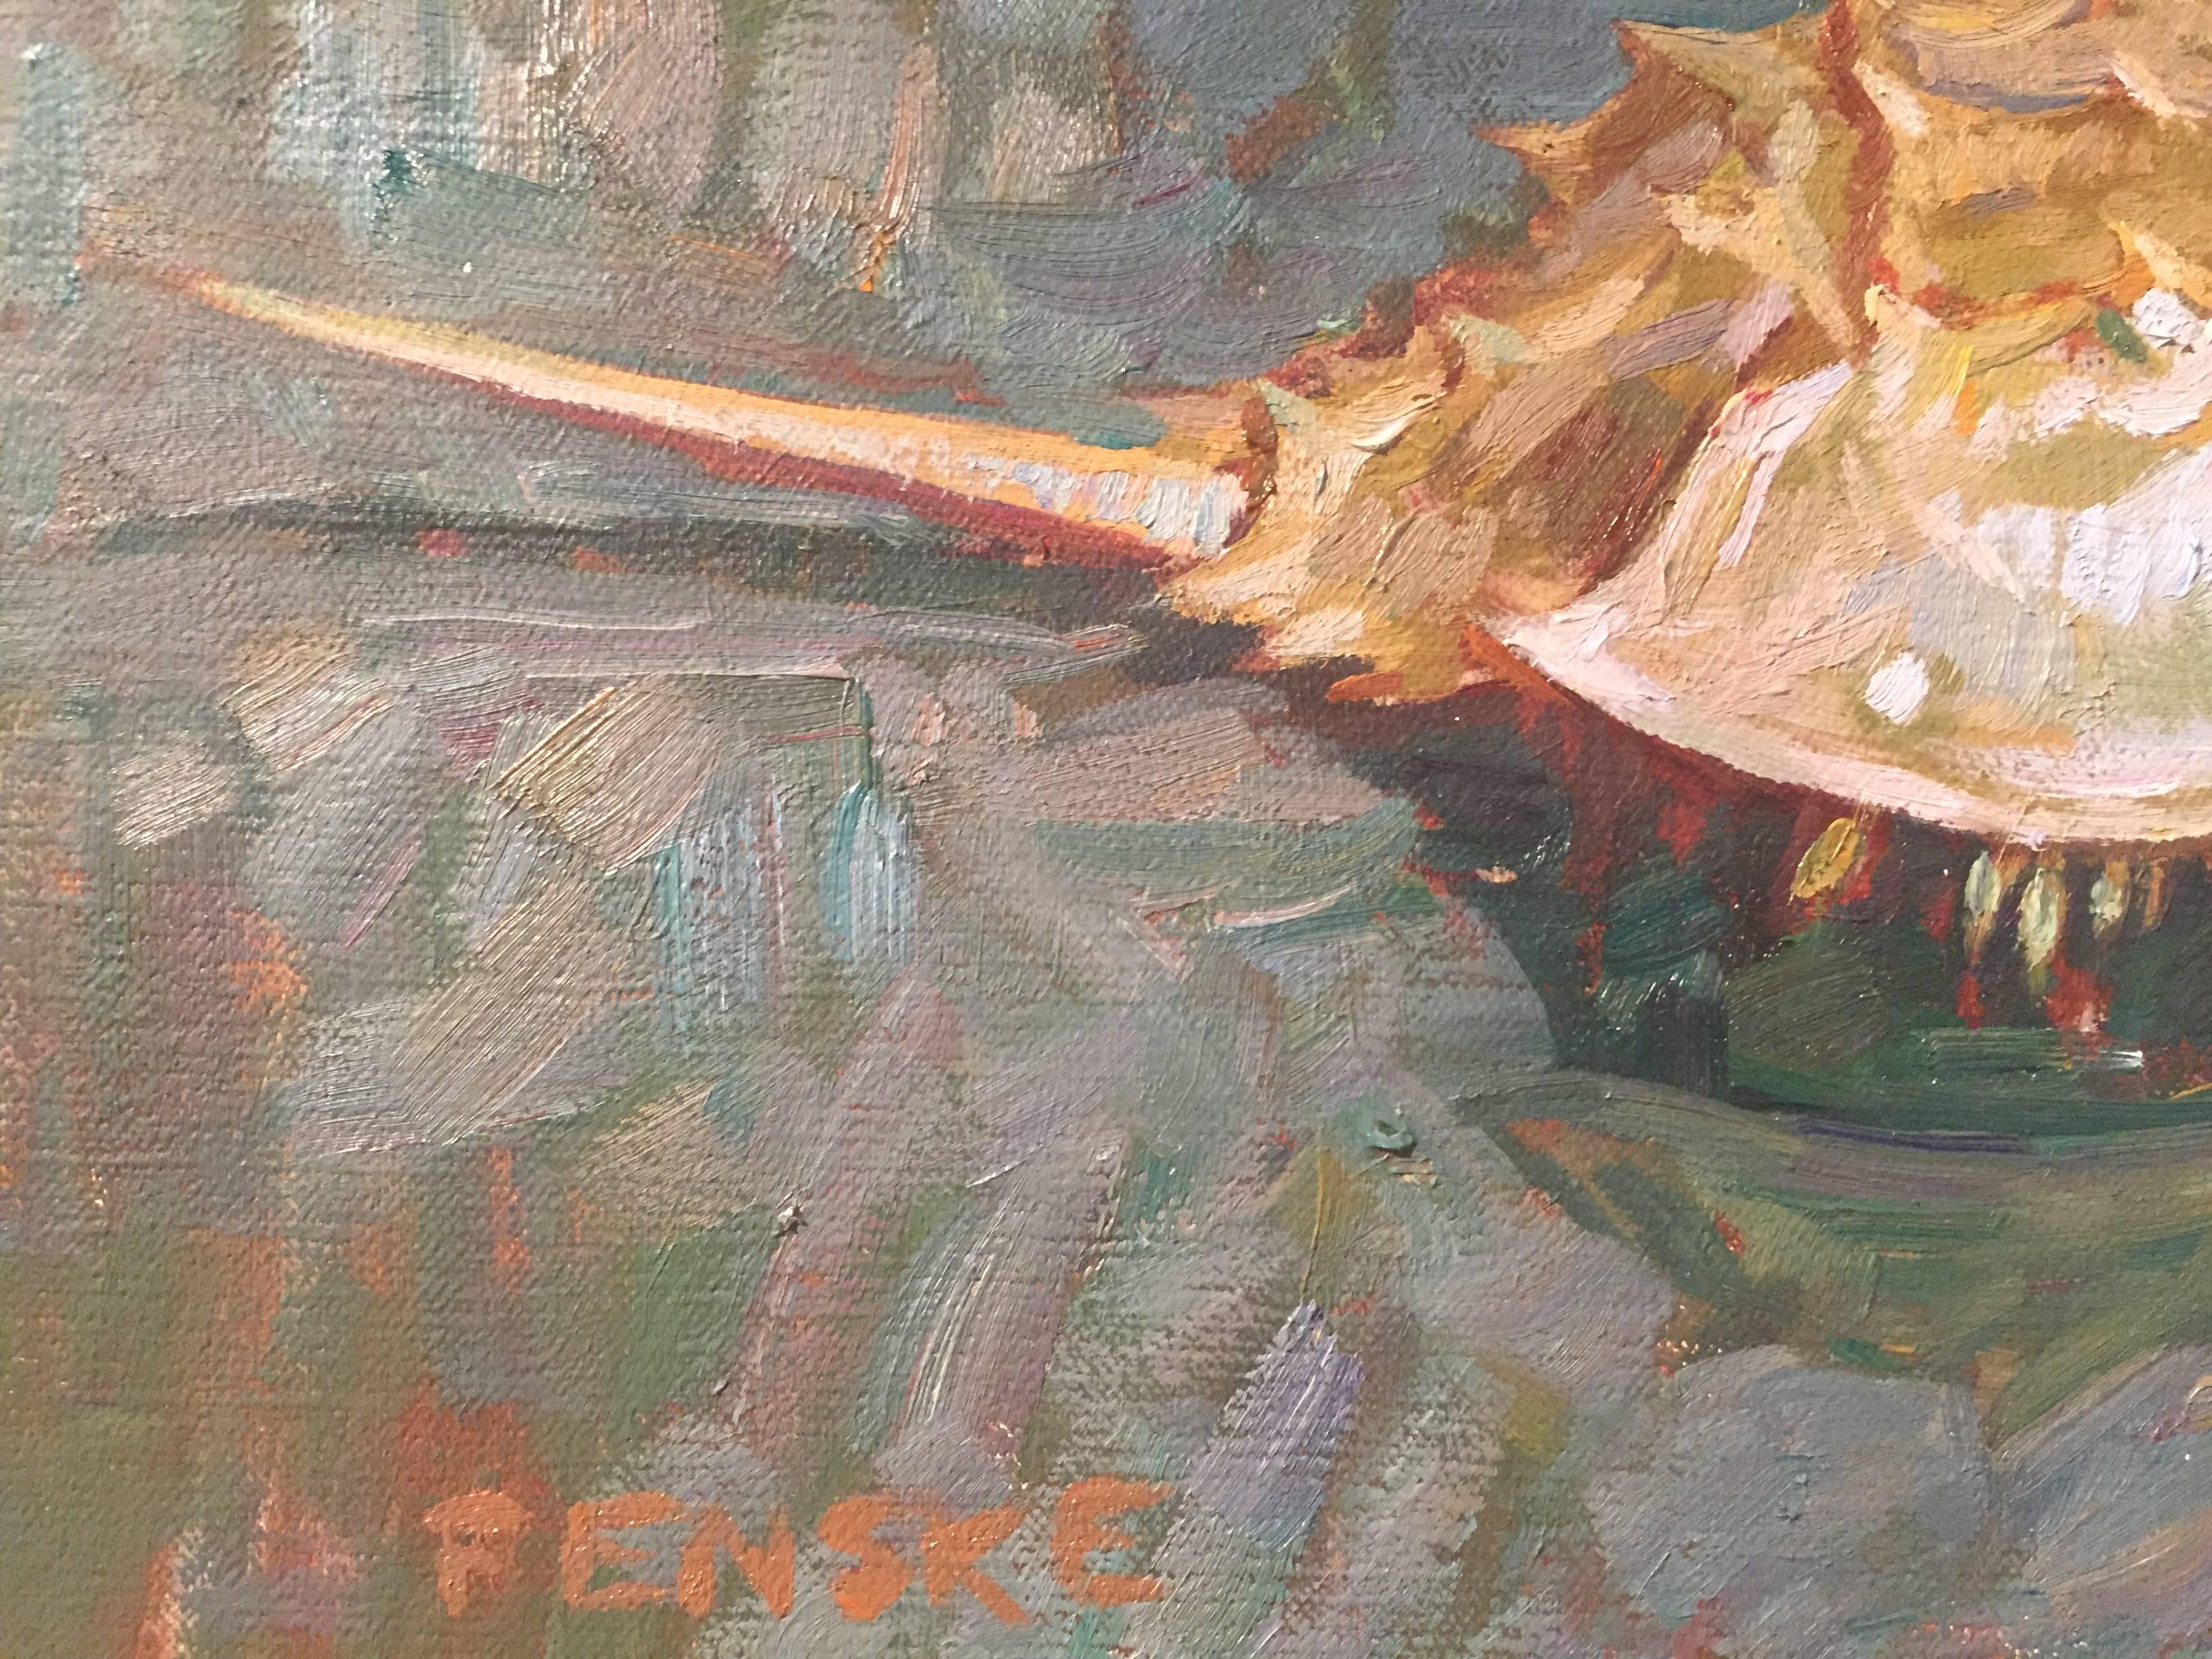 Painted from life, a creature that dates back to prehistoric times. Horseshoe Crabs are known to inhabit the waters of the North-East United States, so its no wonder why Fenske chose to paint the interesting arthropods during his 1.5 month stay in